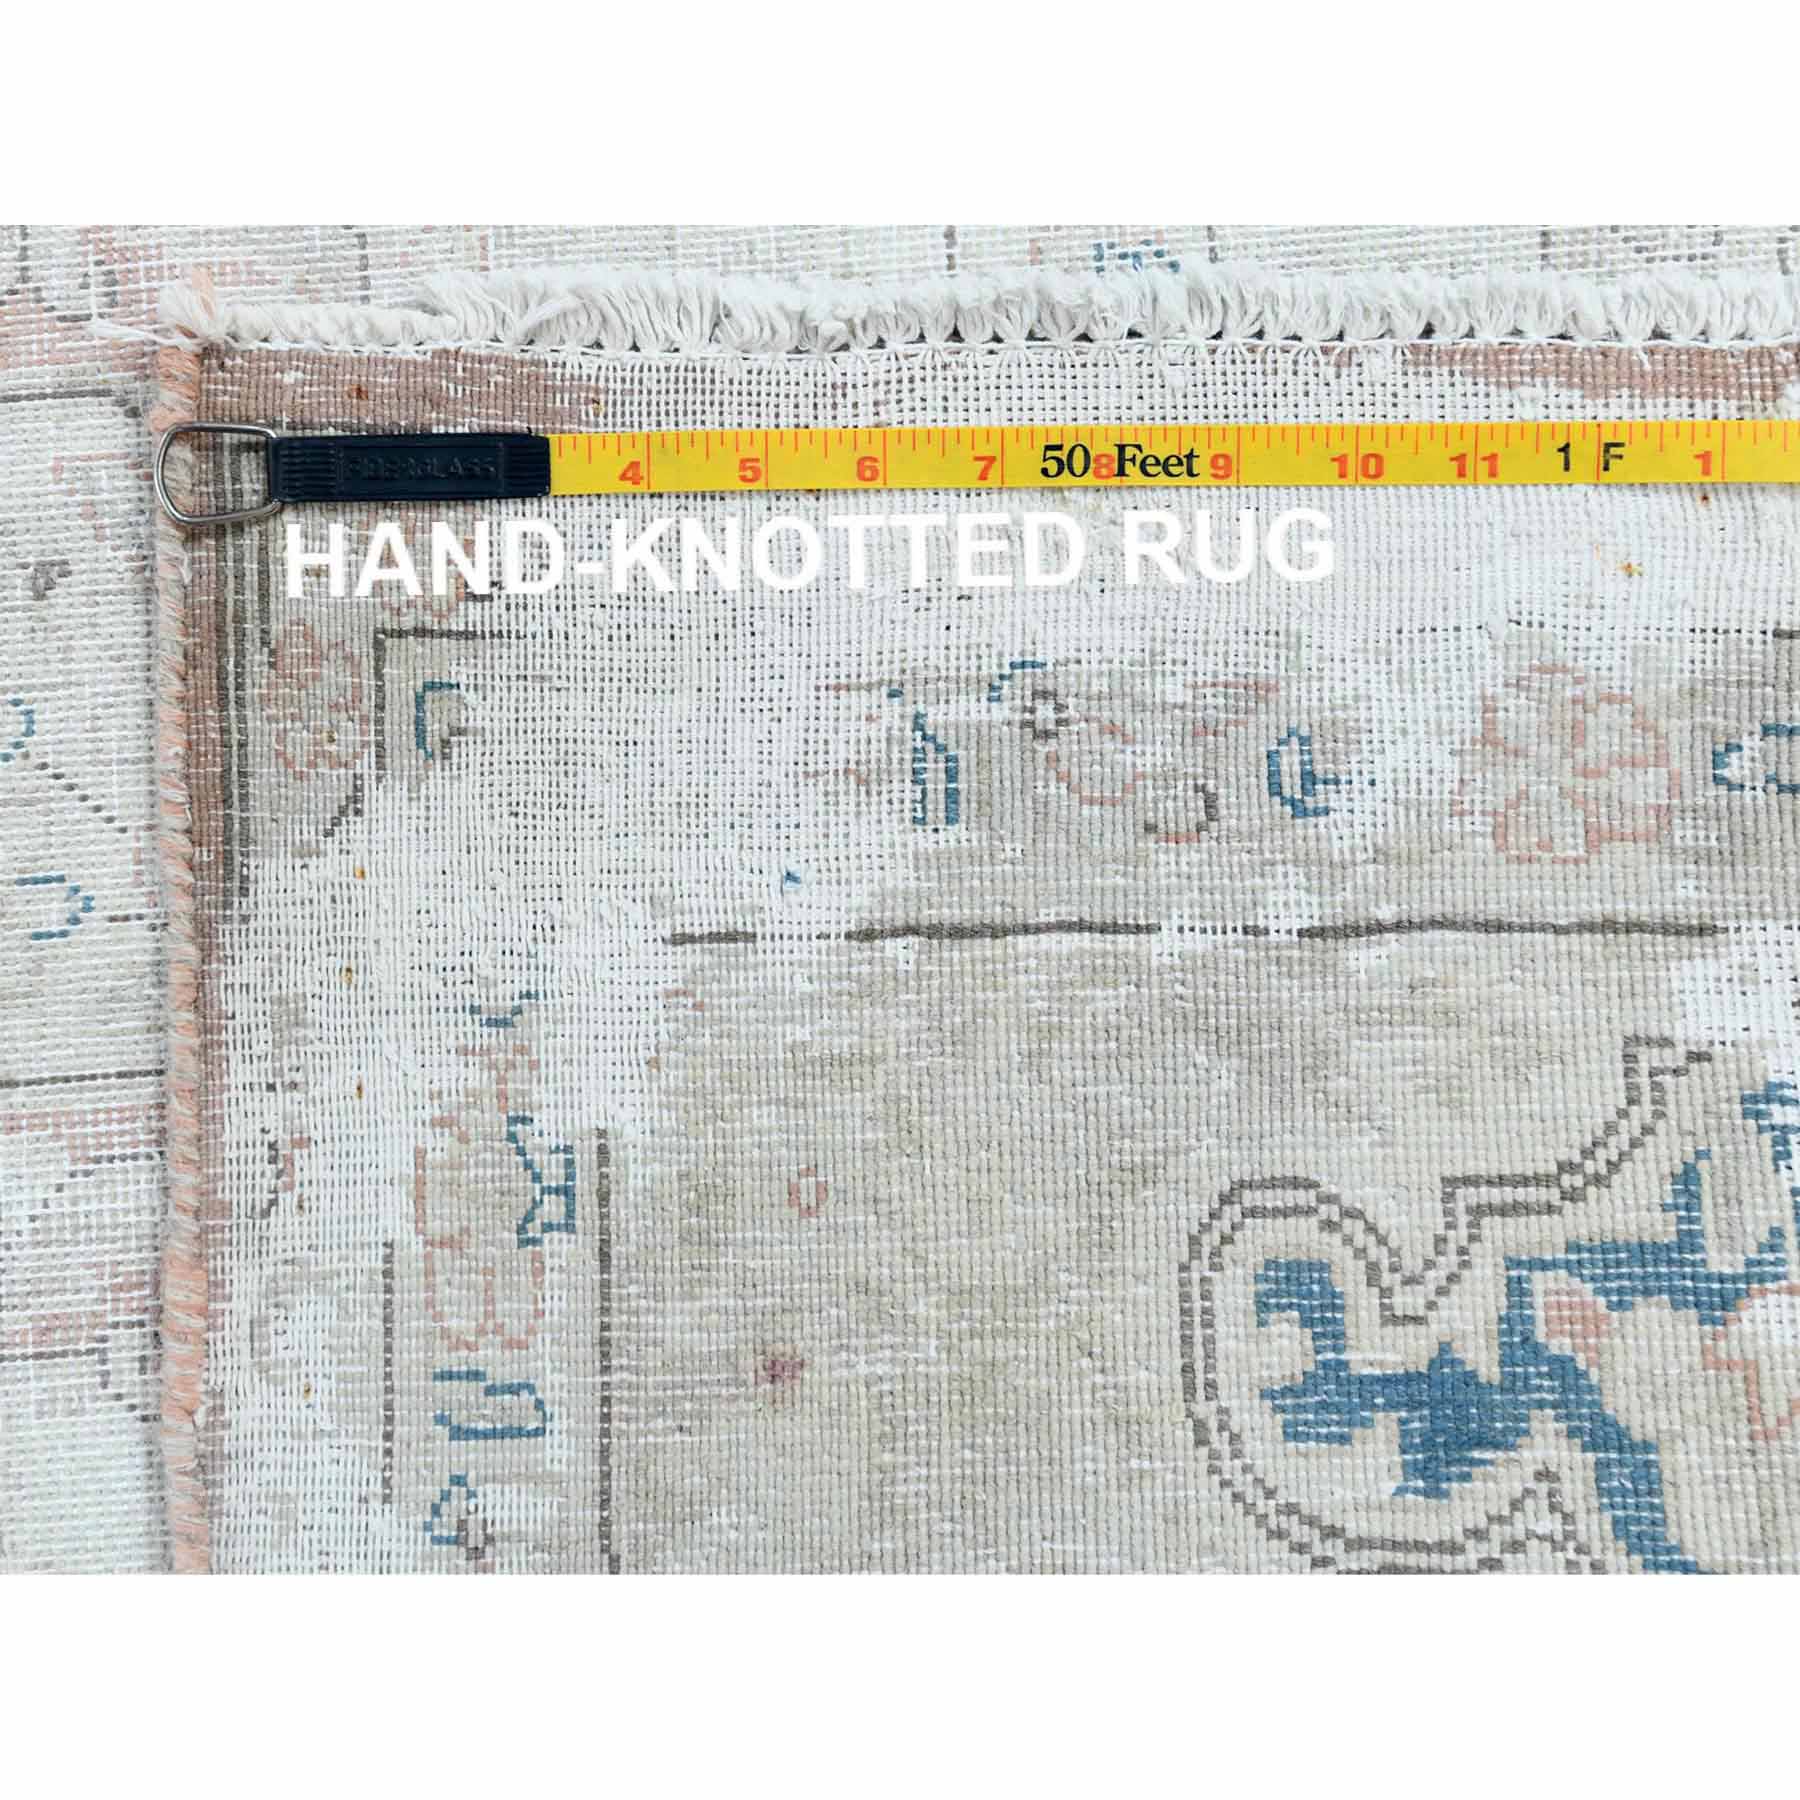 Overdyed-Vintage-Hand-Knotted-Rug-308625